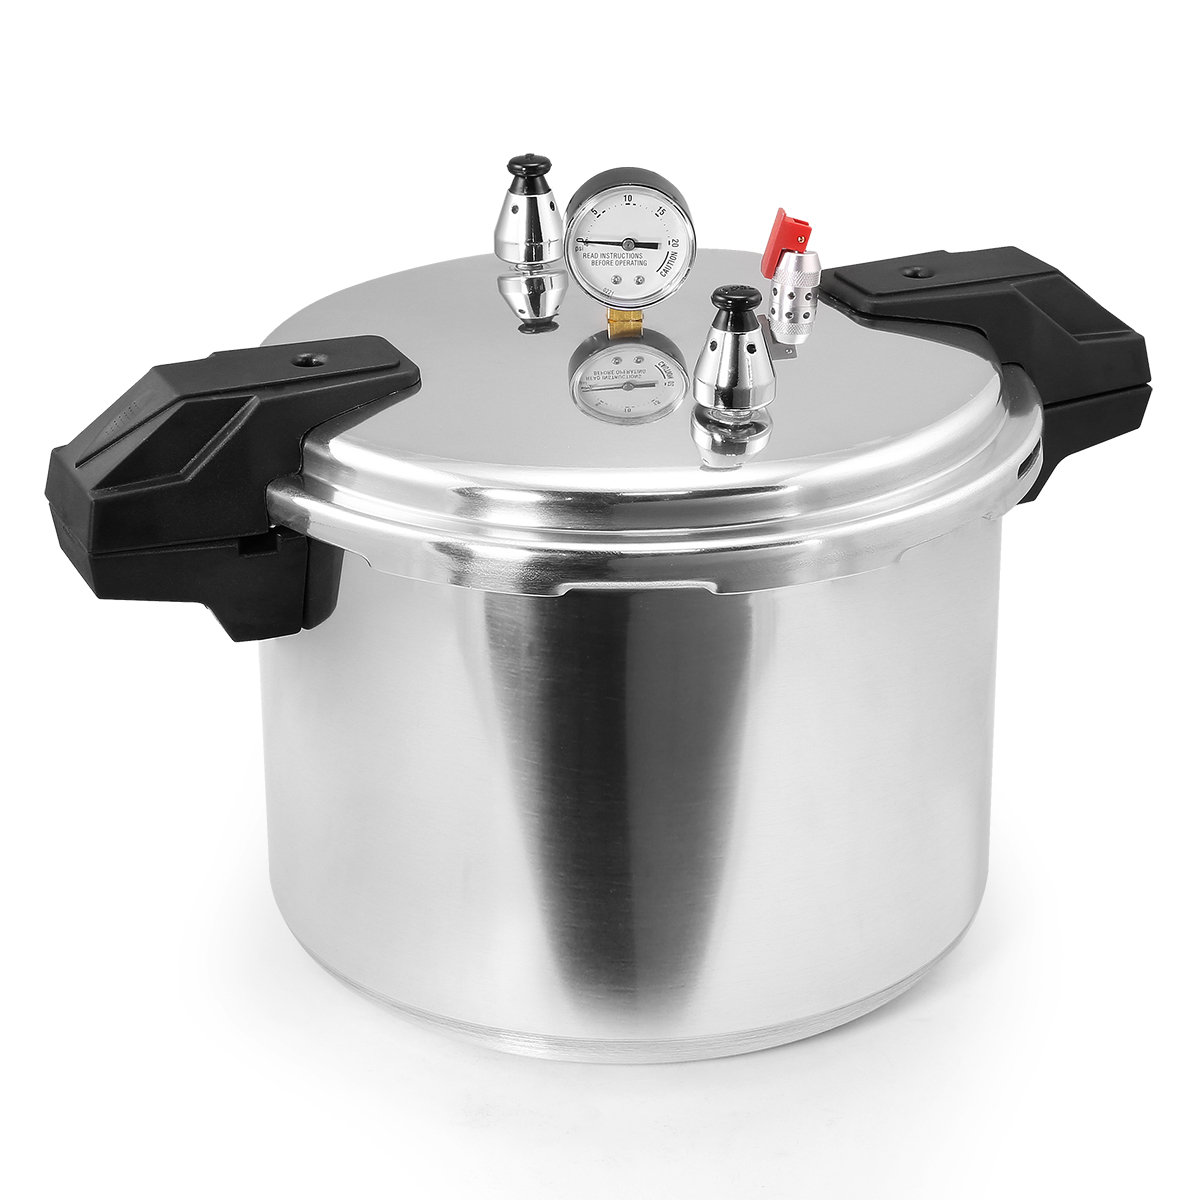 Barton 8 Quart Pressure Cooker Canning Easy Lock Lid Stainless